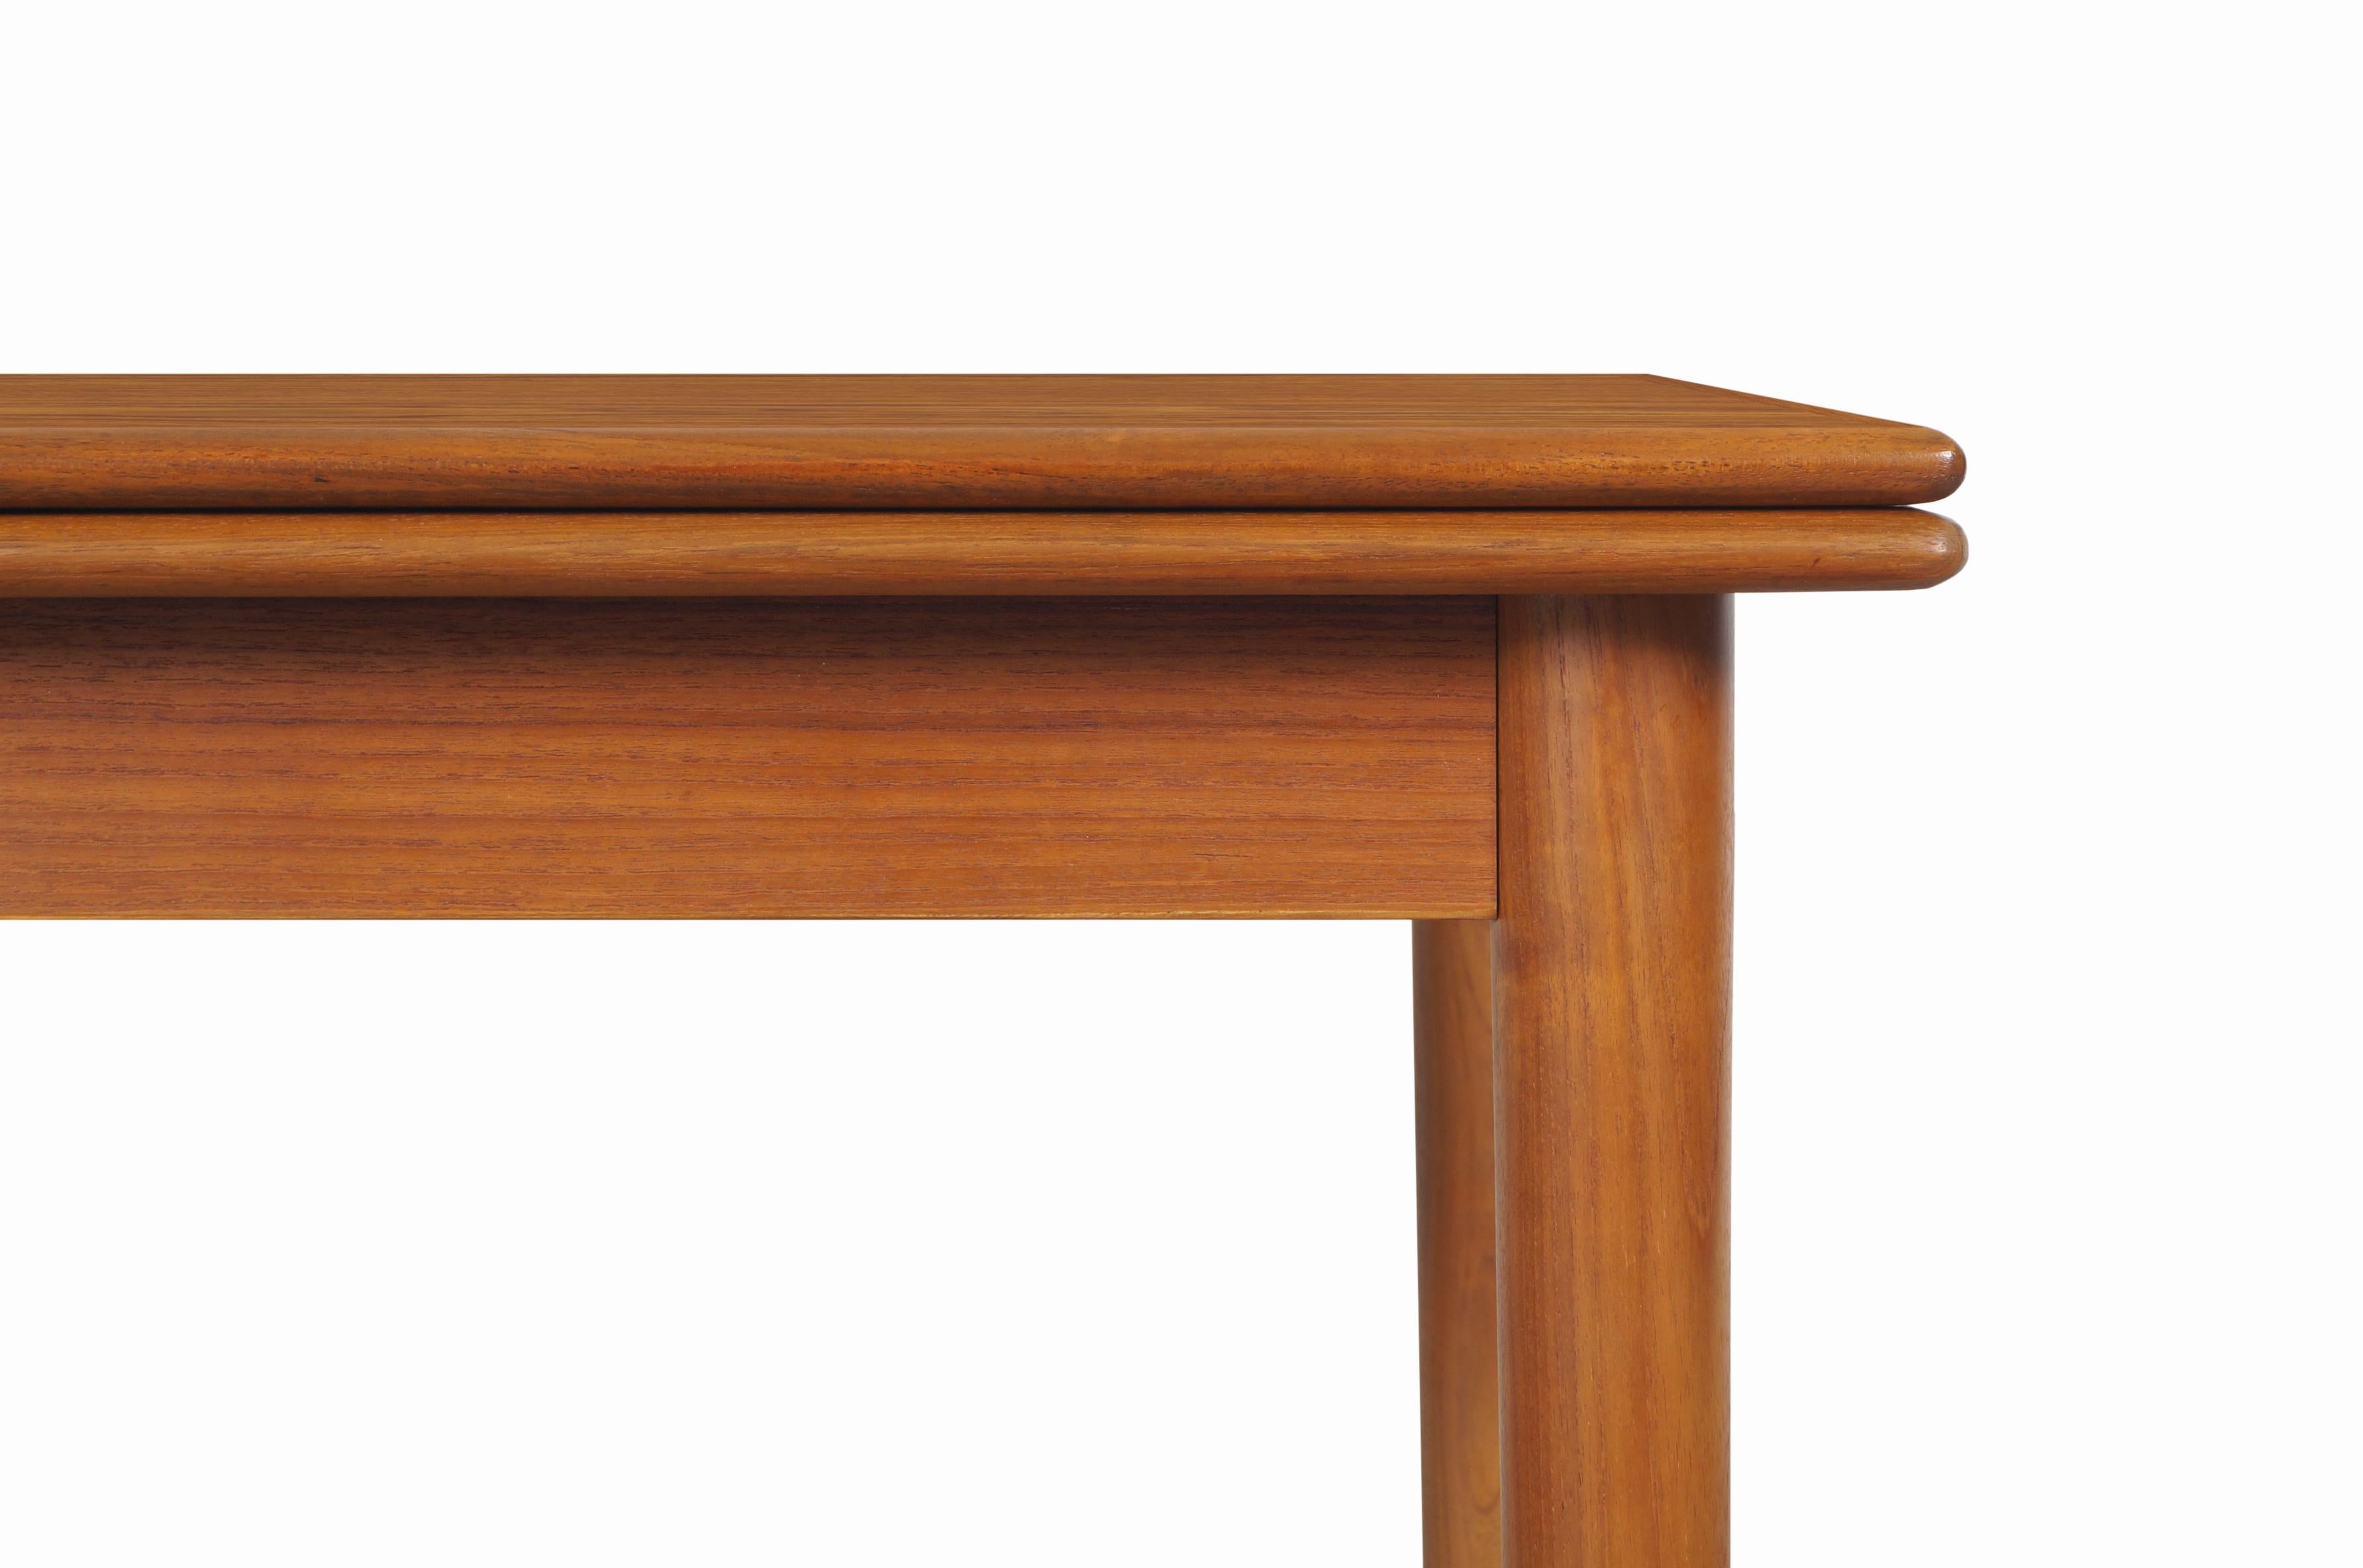 Mid-20th Century Danish Modern Expanding Teak Dining Table by AM Møbler